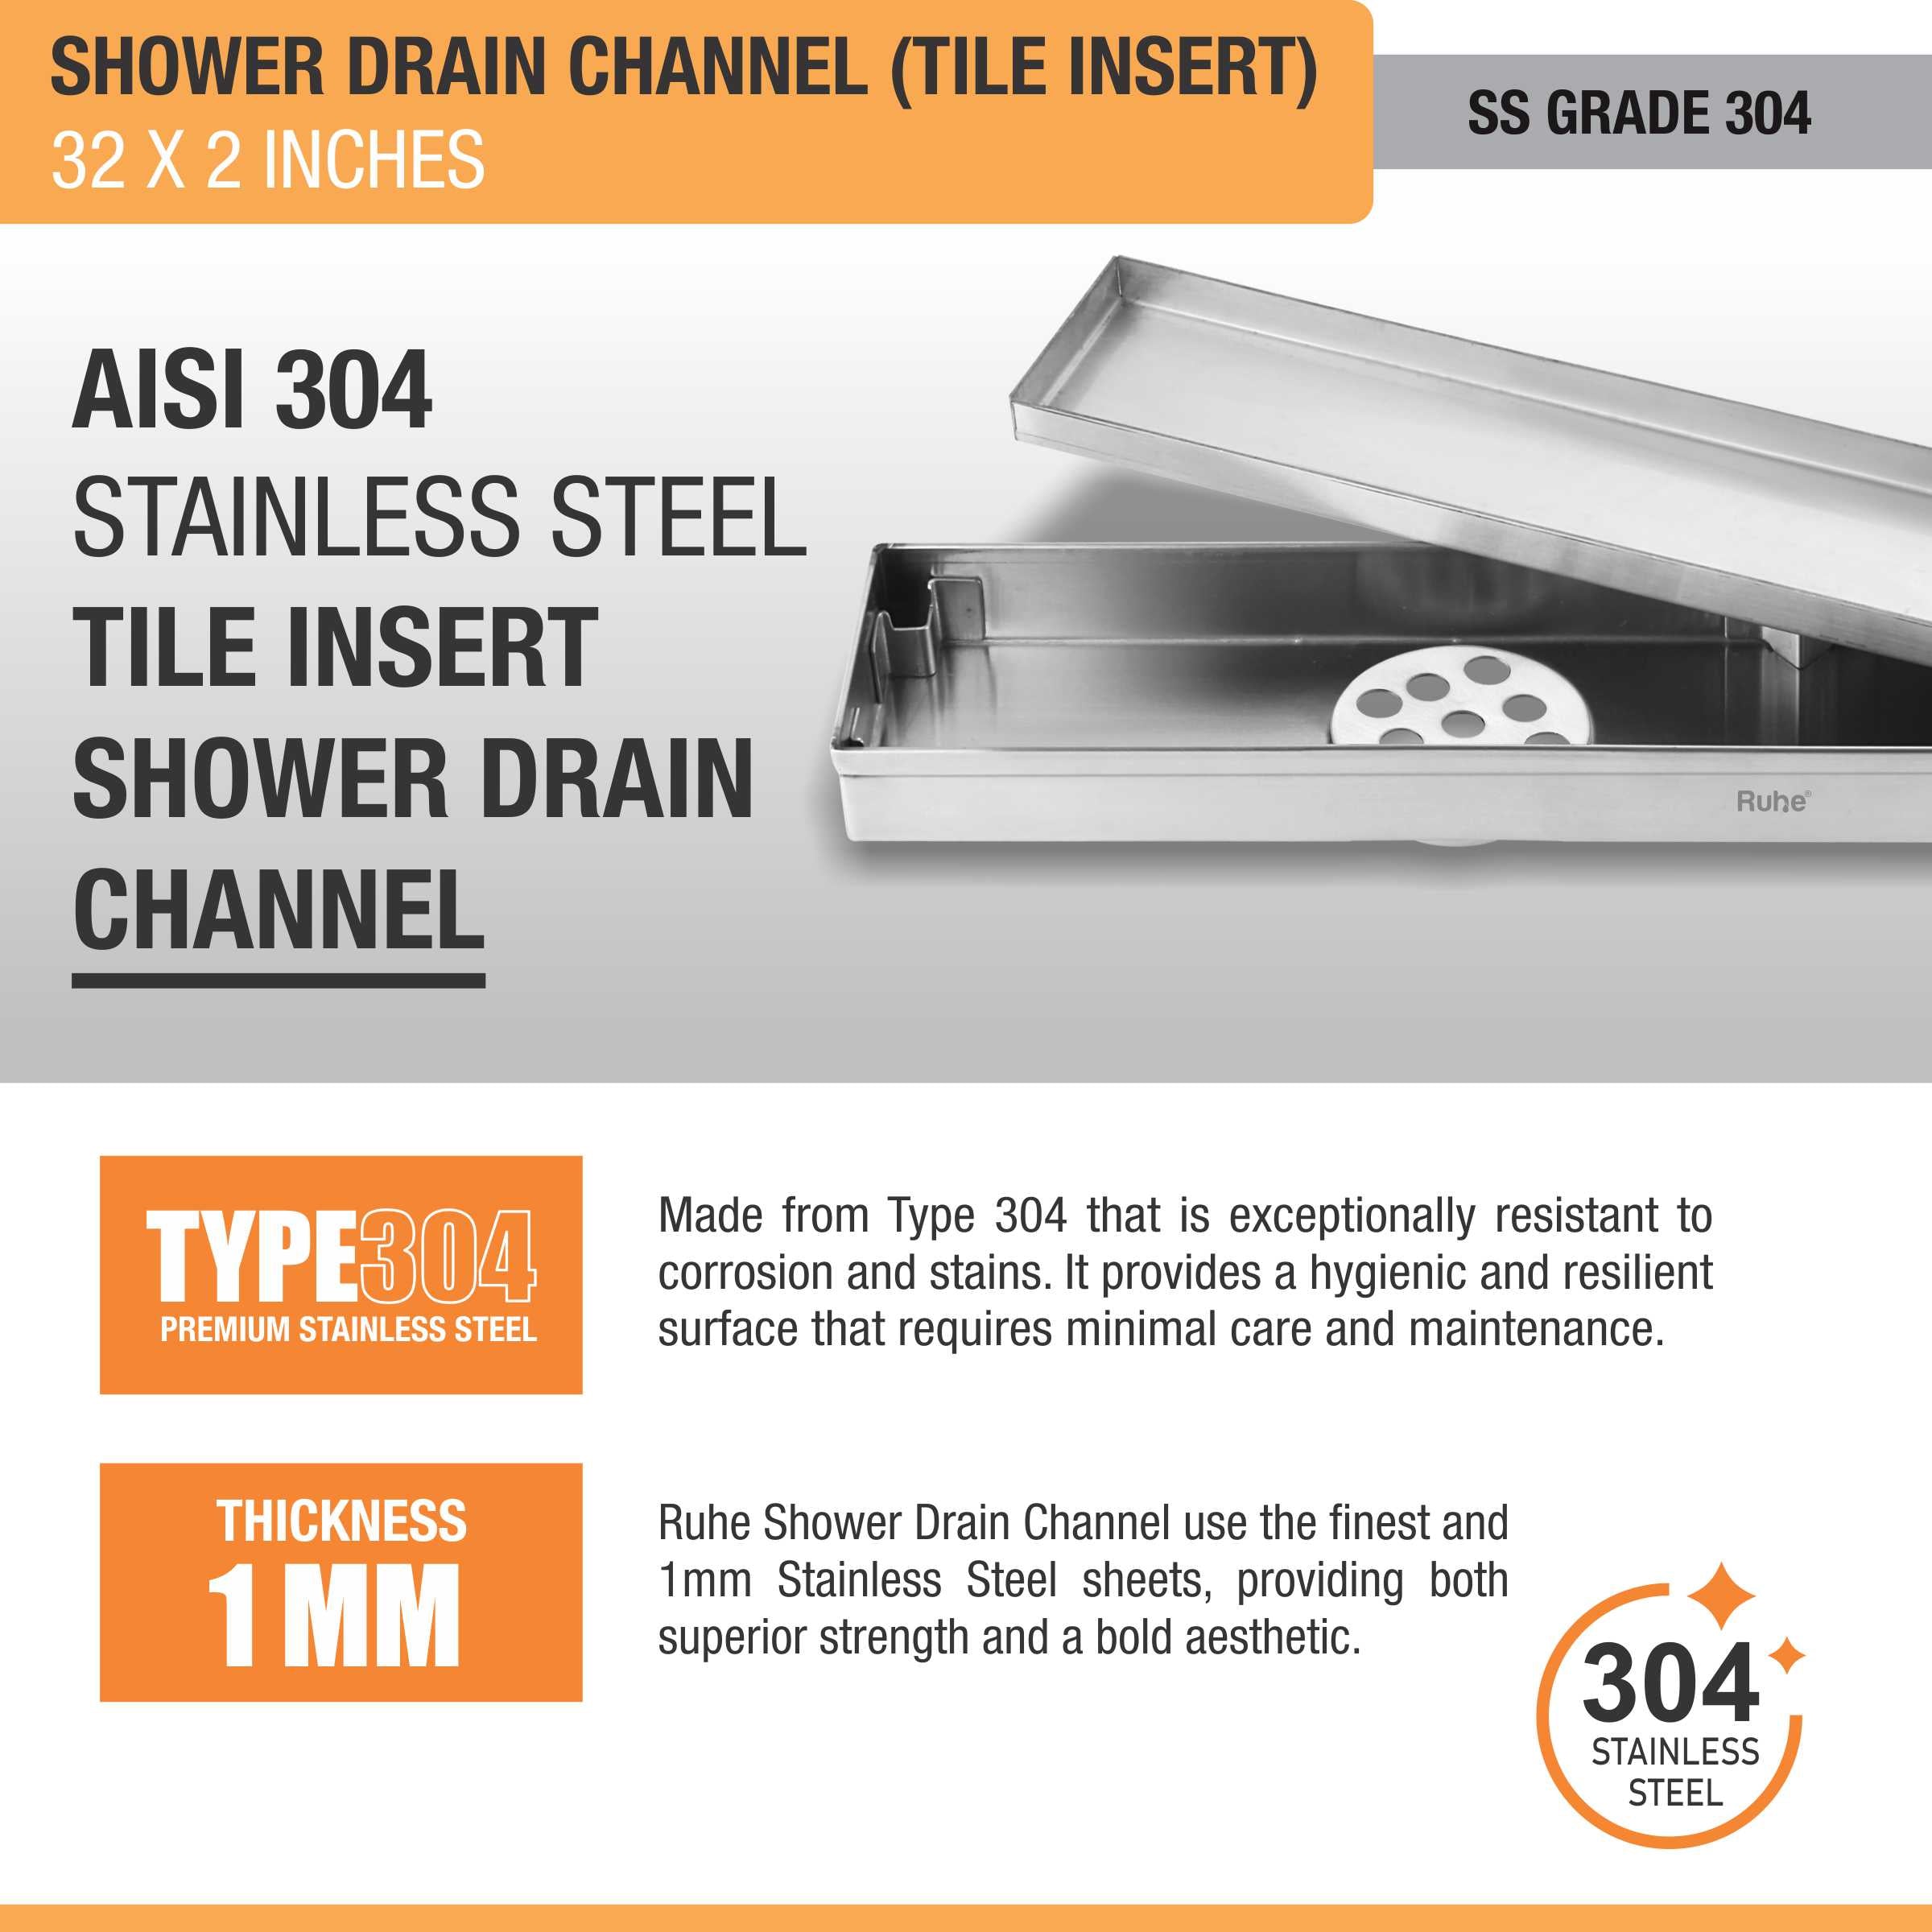 Tile Insert Shower Drain Channel (32 x 2 Inches) (304 Grade) stainless steel